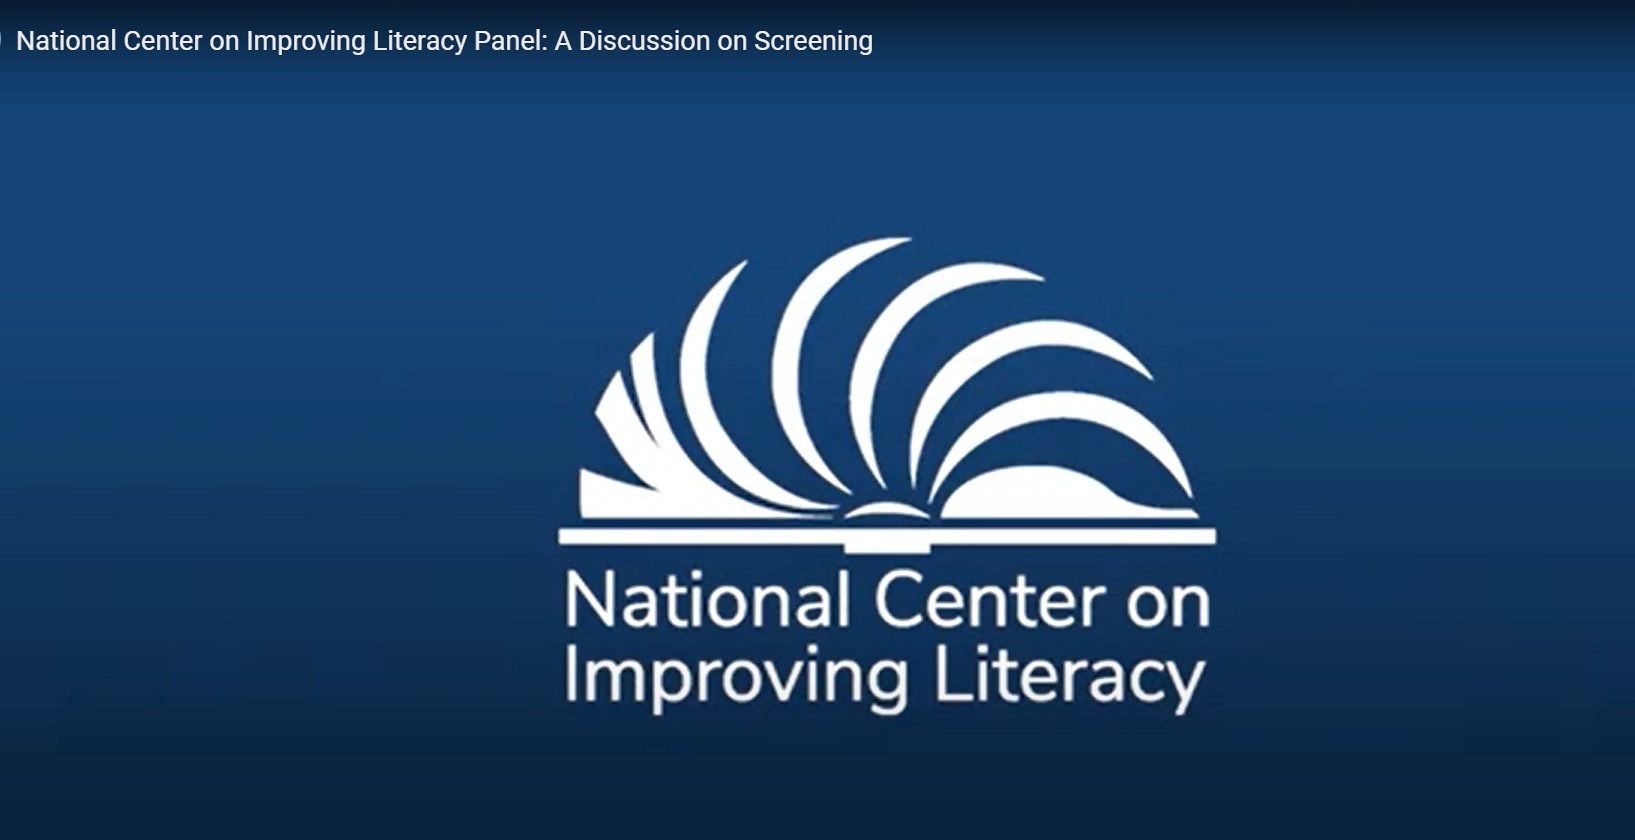 A Discussion on on Screening from the National Center on Improving Literacy